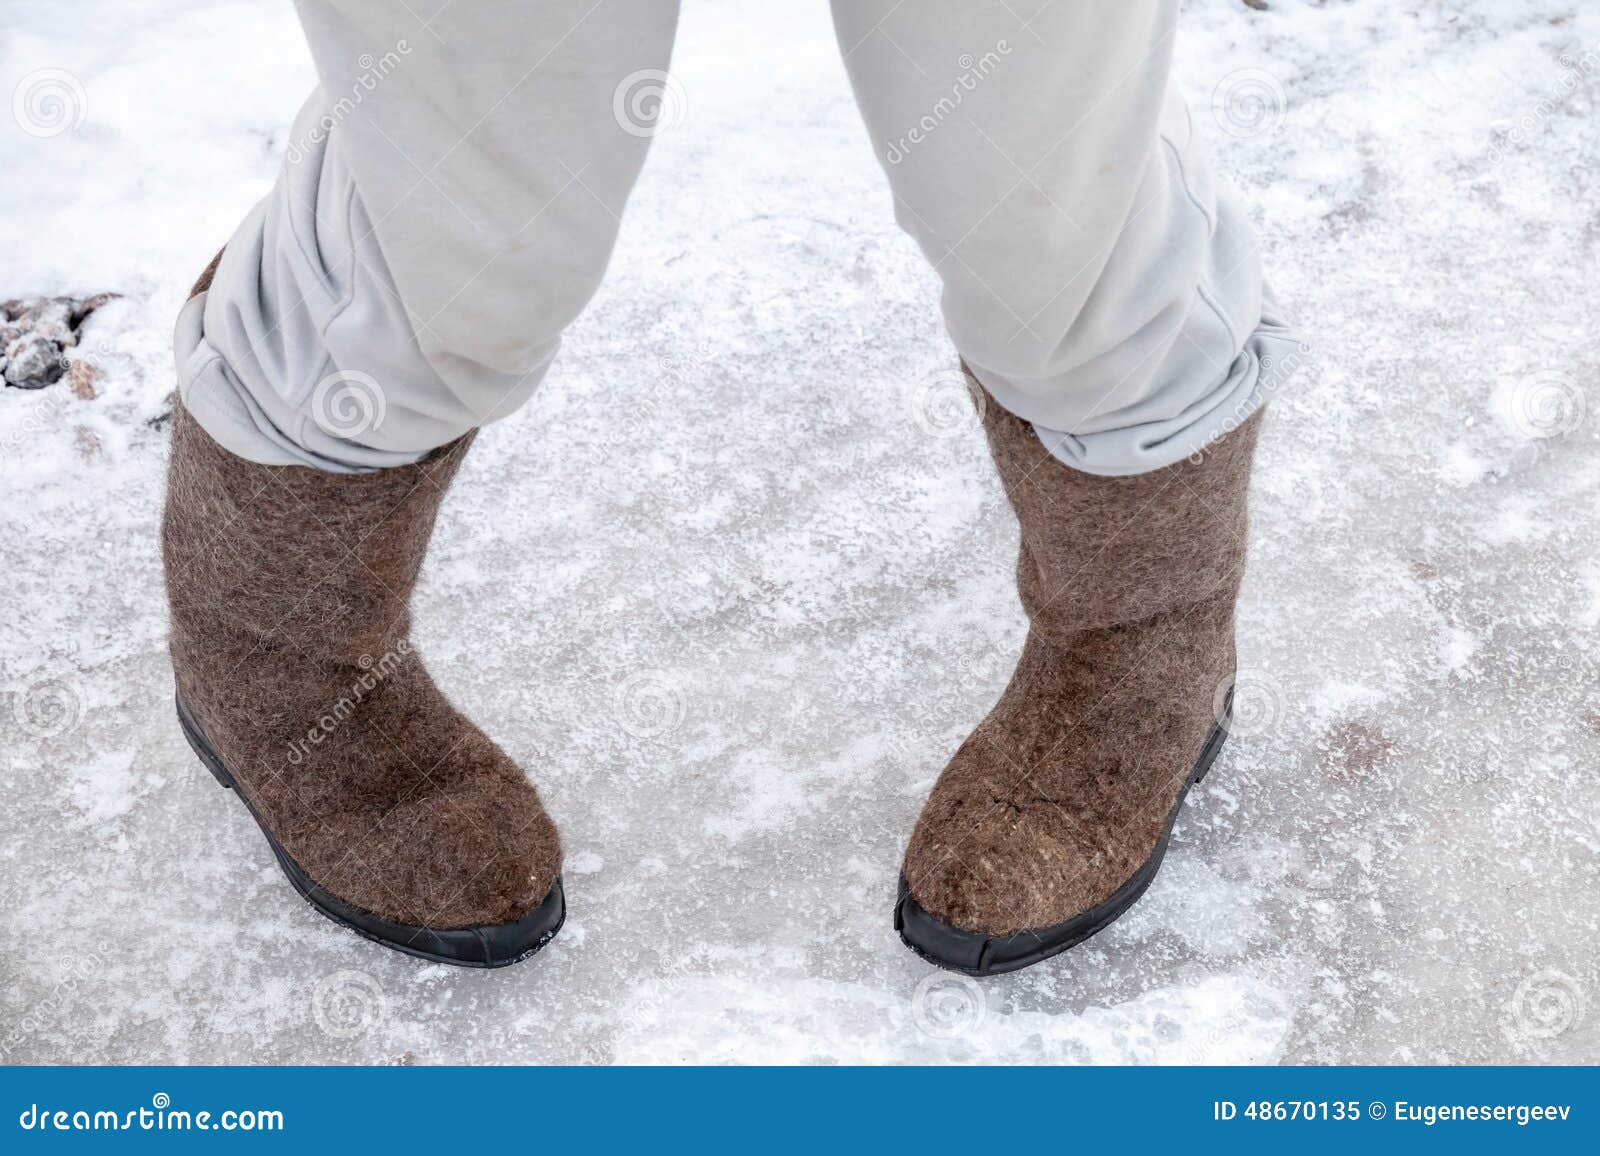 Dancing Male Feet with Traditional Russian Felt Boots Stock Image ...